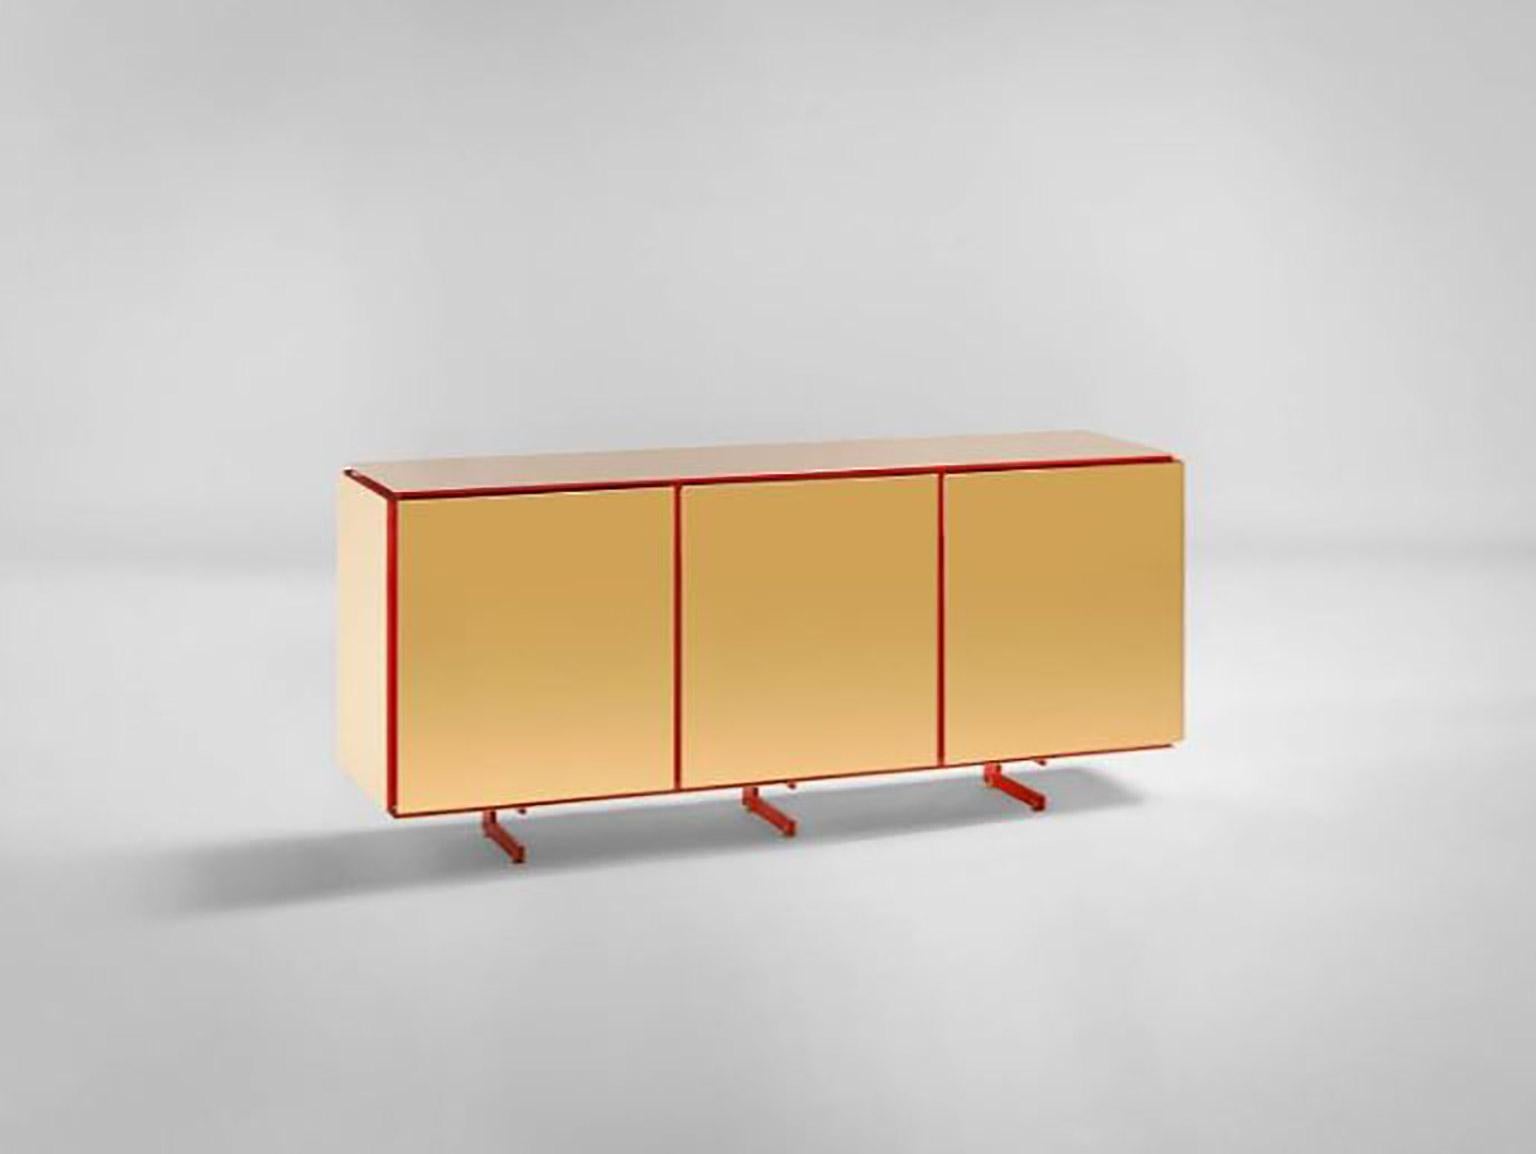 SEM Gold collection, three doors sideboard. Corallo lacquered wooden structure, gloss finish. Available more colorway variants. External shell in 24-karat polished yellow gold-plated combined with ultra-reflective steel. The Gold collection has a